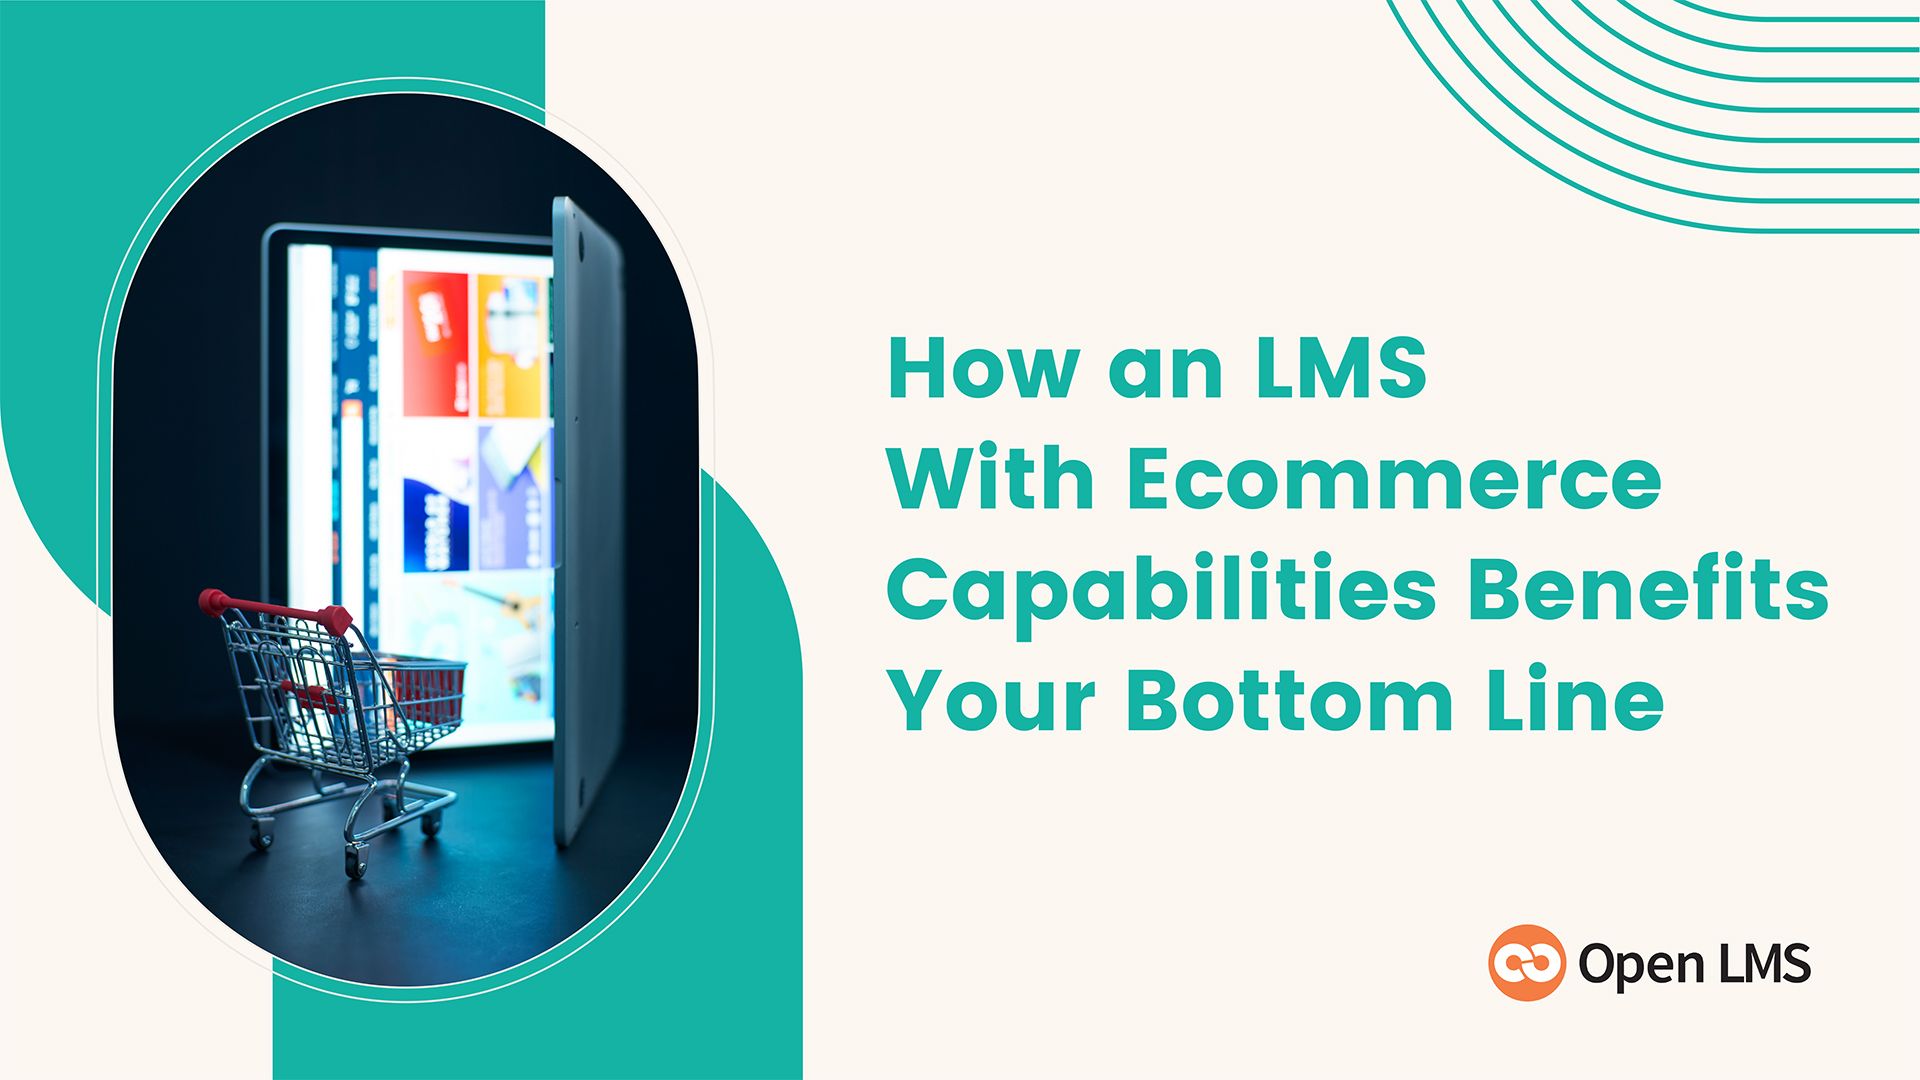 How an LMS With Ecommerce Capabilities Benefits Your Bottom Line: 5 Tips for Implementation